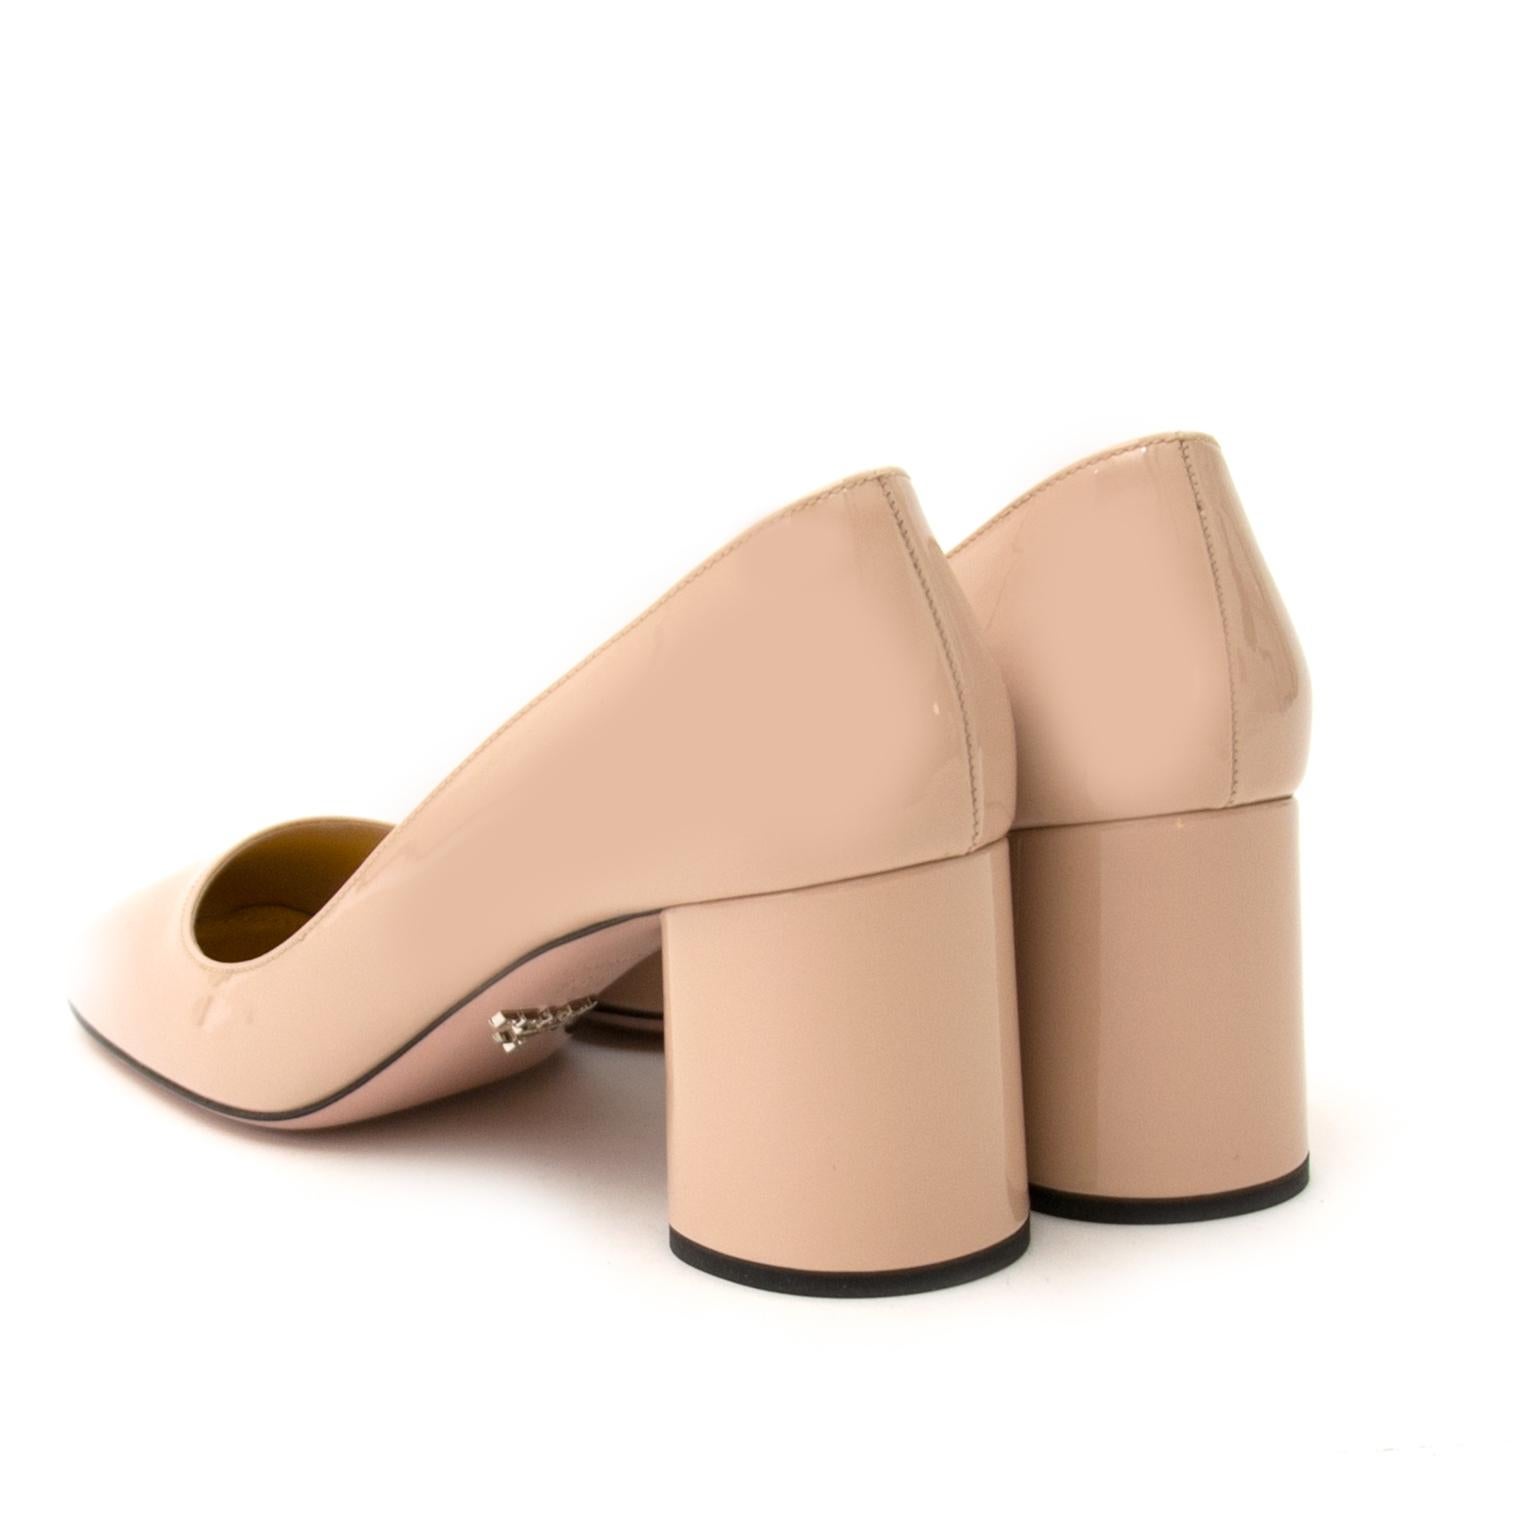 Excellent condition

Prada Nude Patent Block Heeled Pumps - Size 36.5

These classic Prada pumps are made from Nude patent leather and are perfect for that everyday classy look.

You can wear these beauties to go to work as well as to go out with